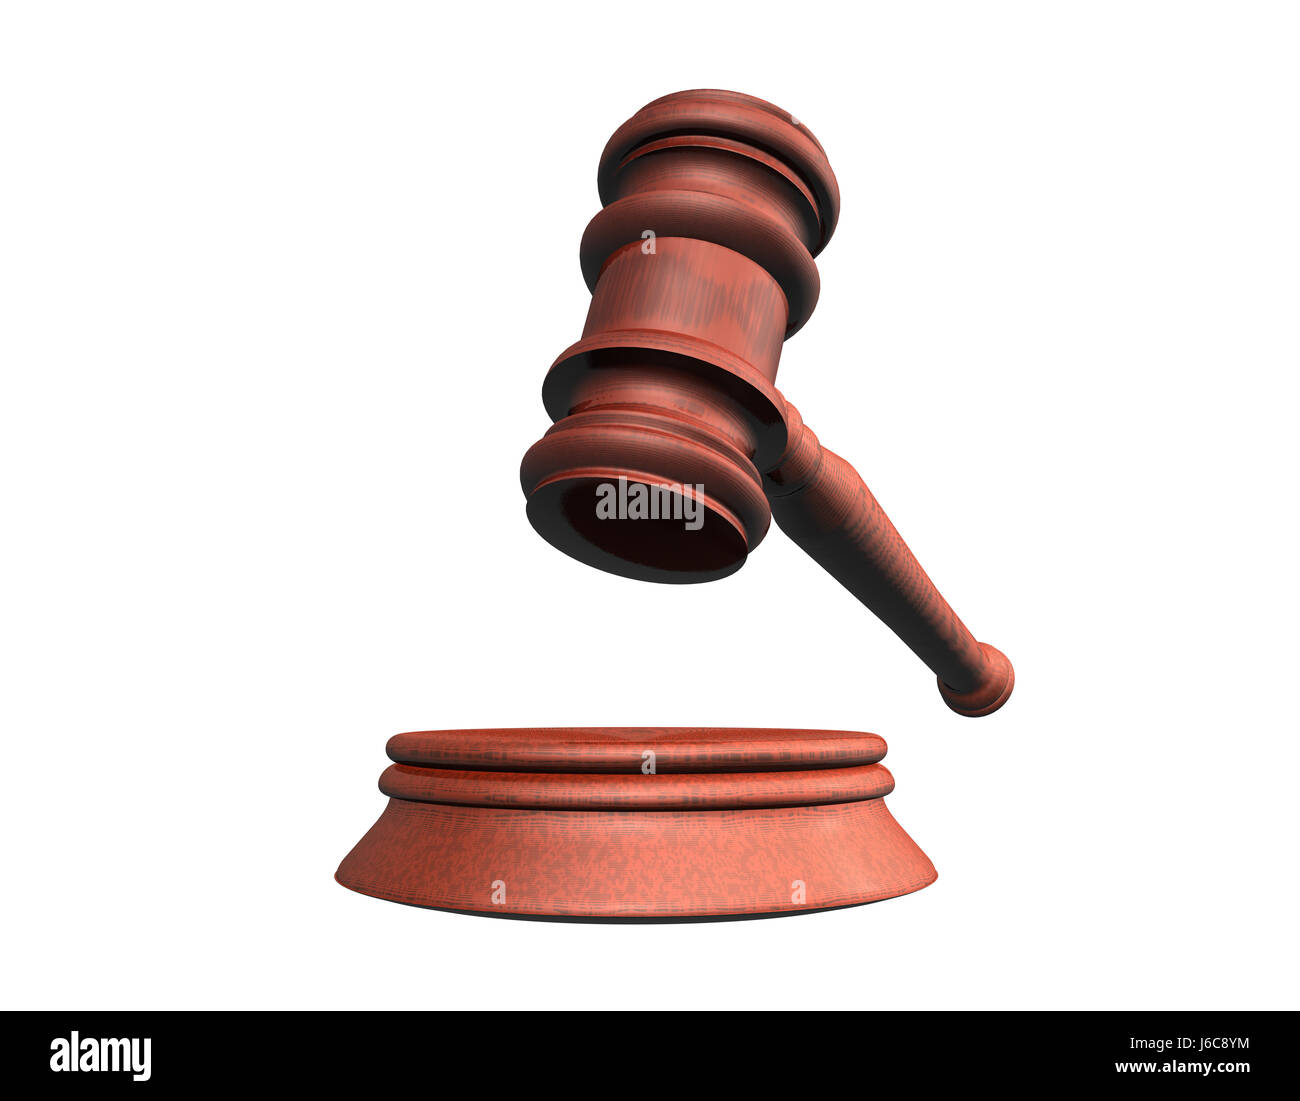 justice auction trial court rendering symbol picture whiter jurisdiction Stock Photo